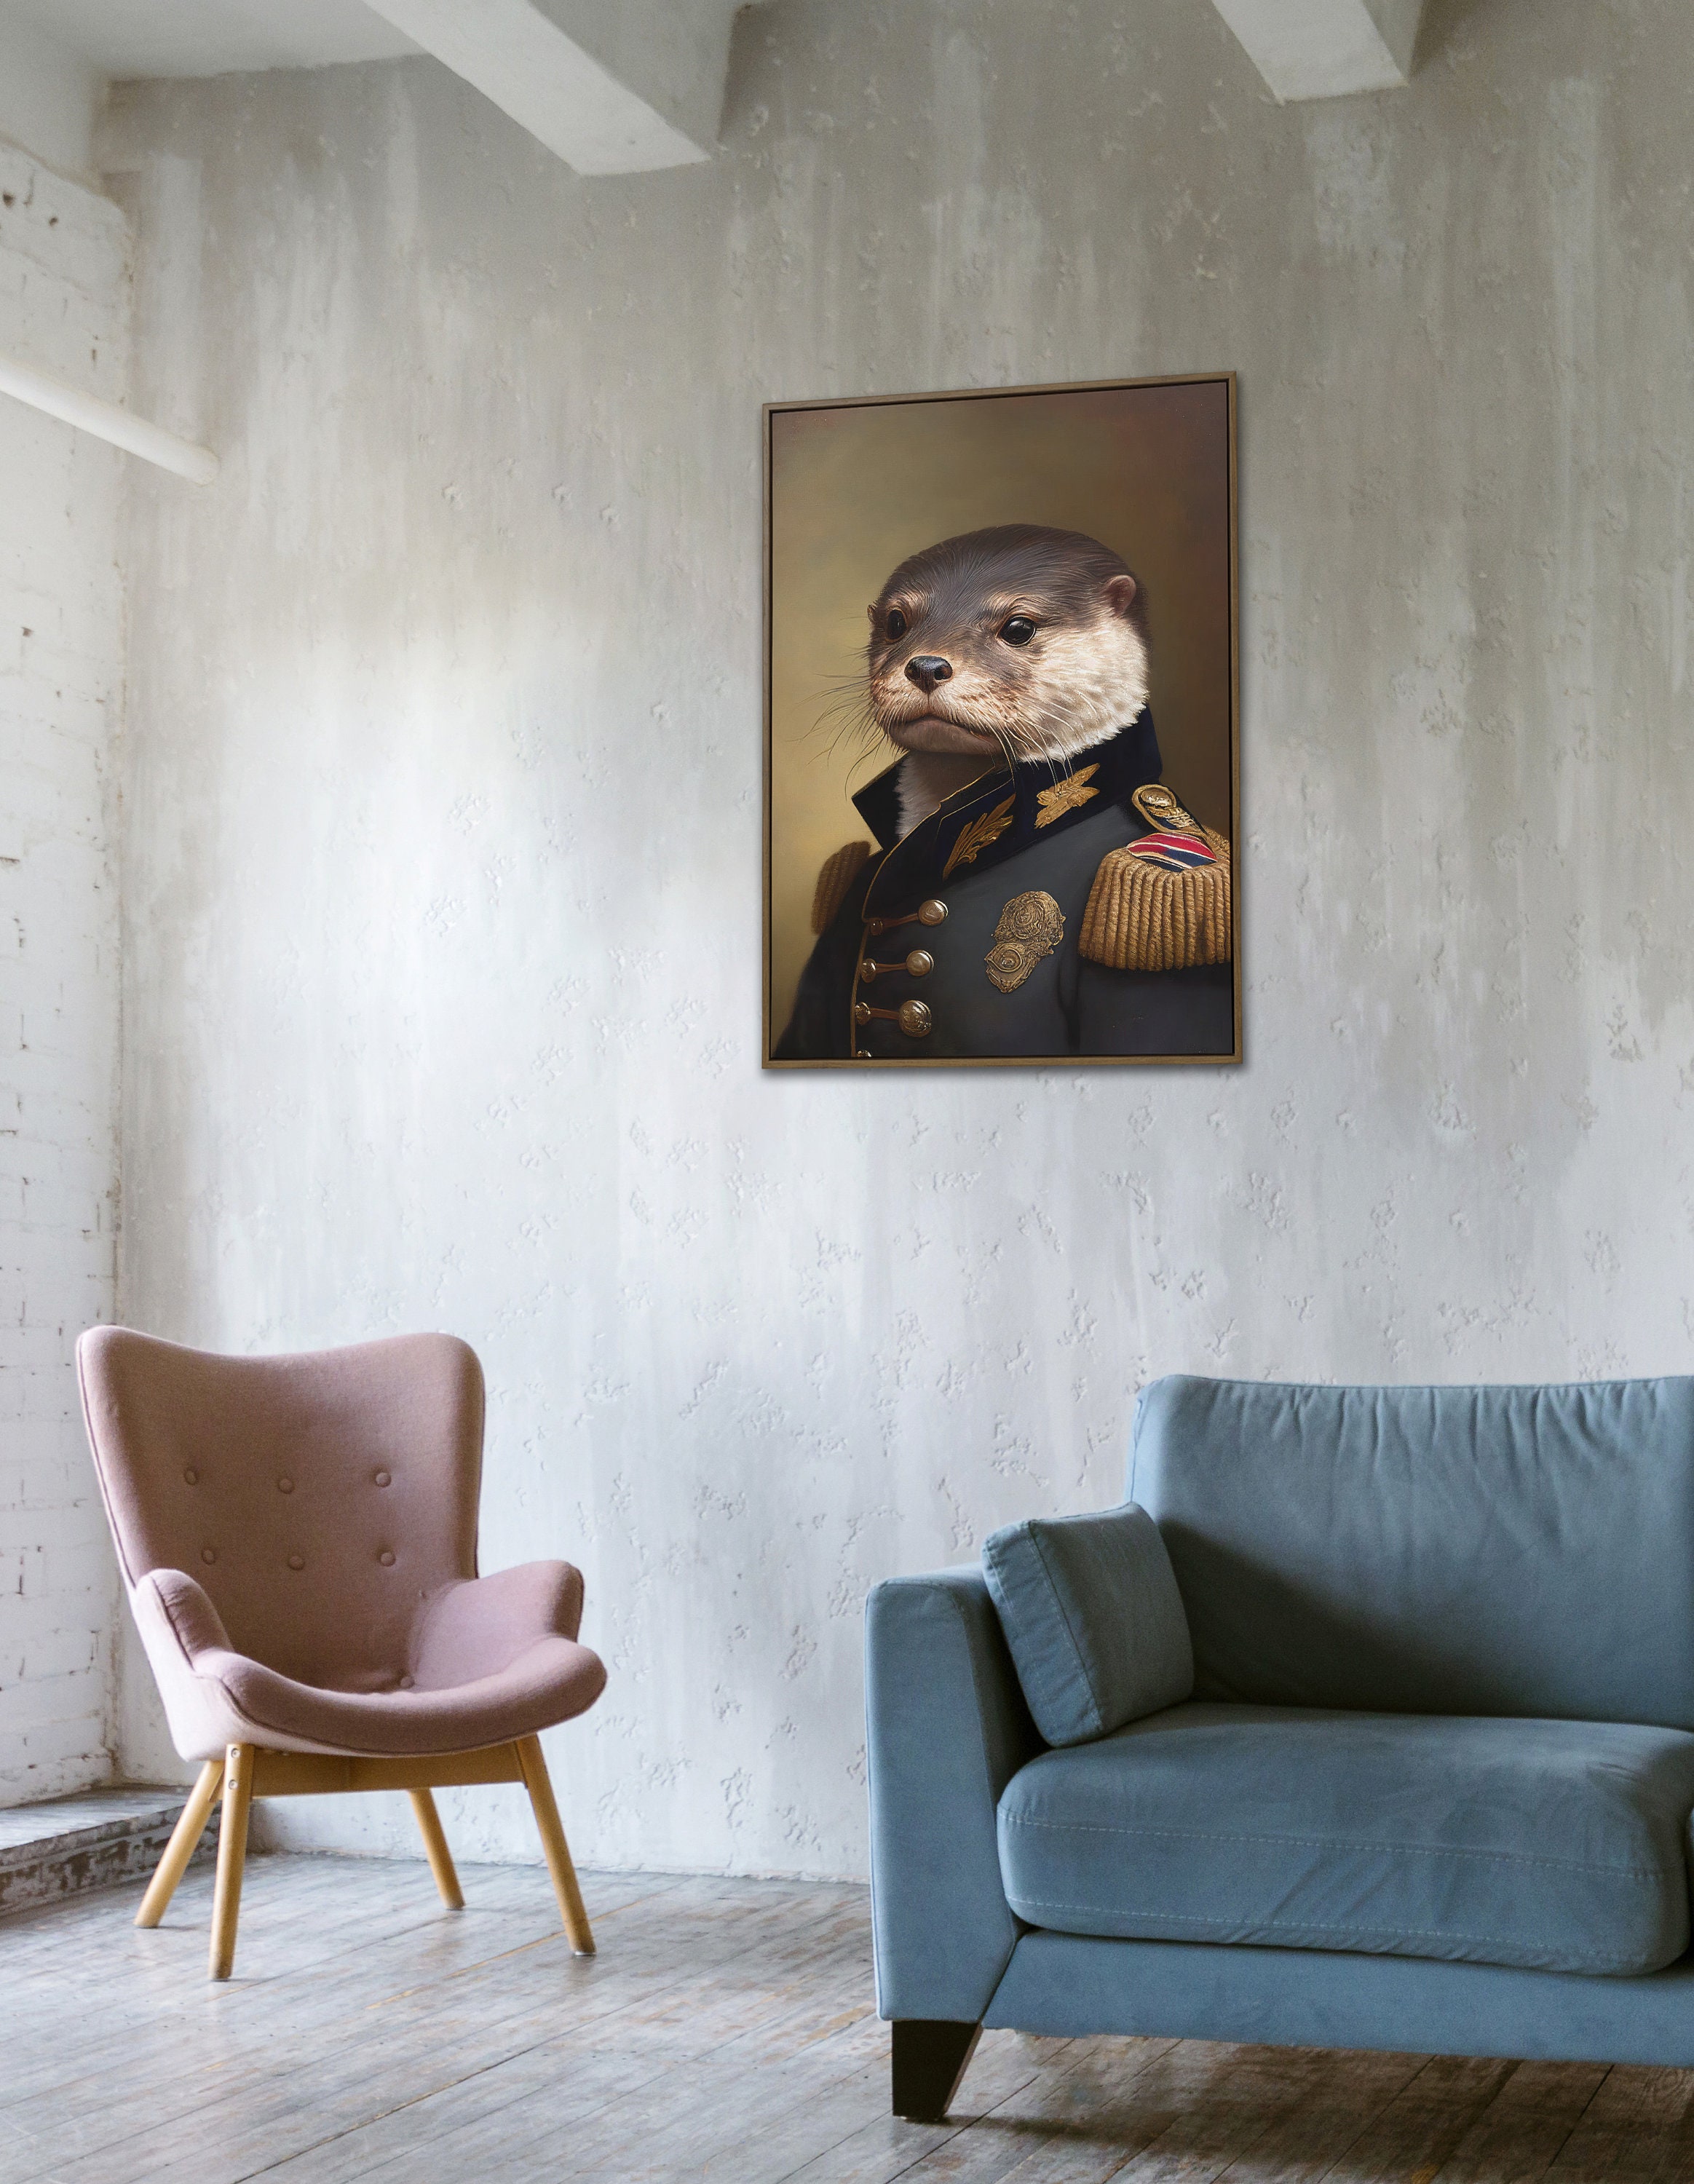 Discover Portrait of an Otter in Military Uniform, Animal Wall Decoration, Otter Poster, Otter Wall Print, Wall Art, No Frame